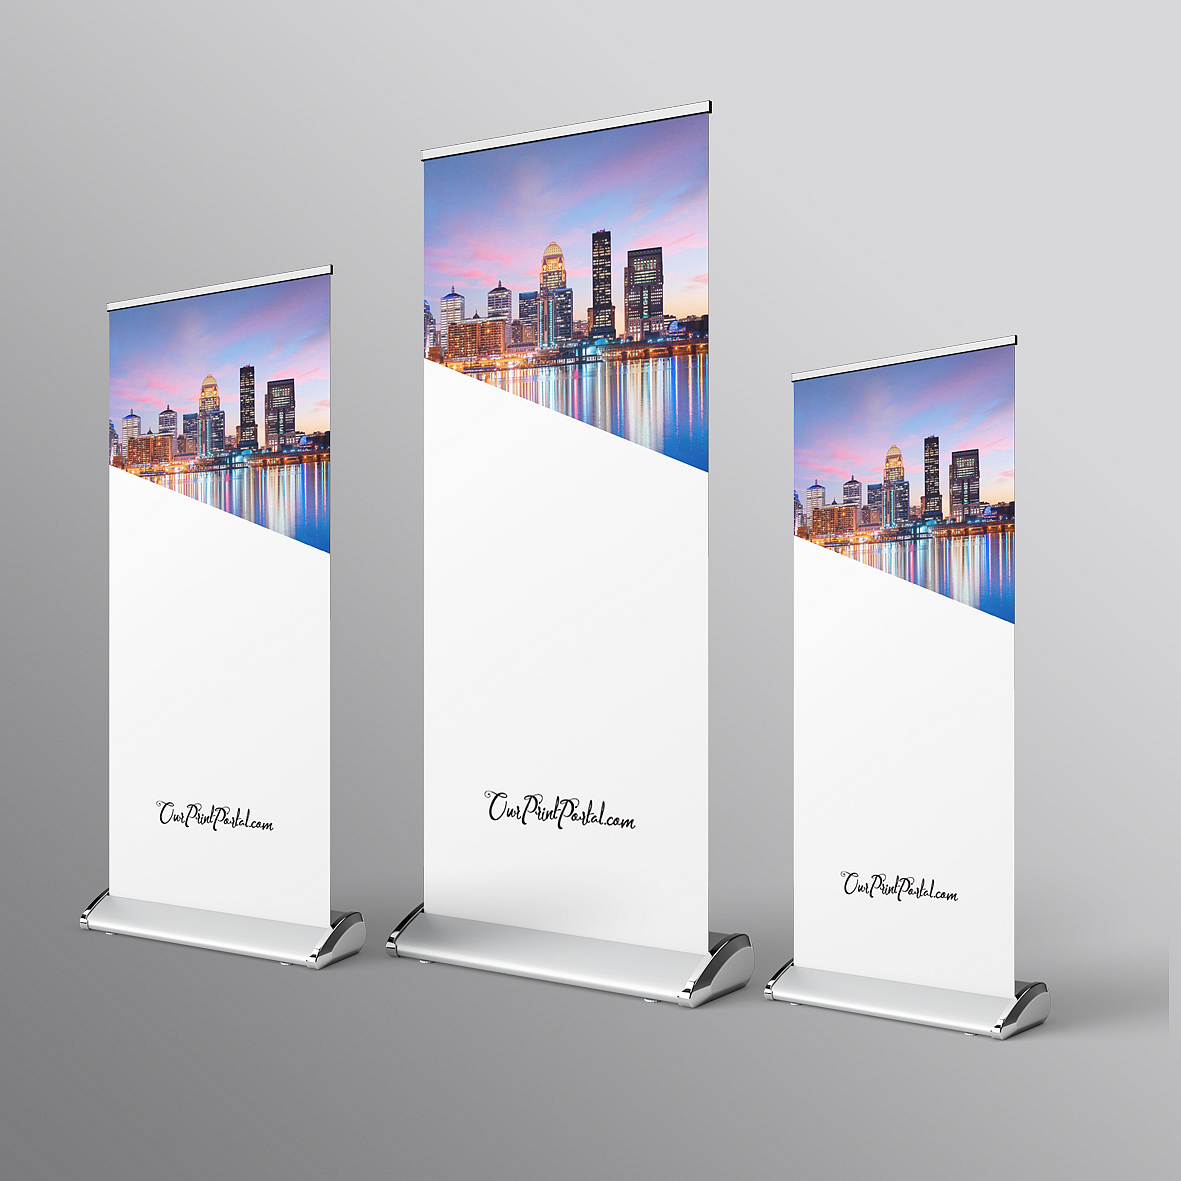 2000mm Wide Roller Banners